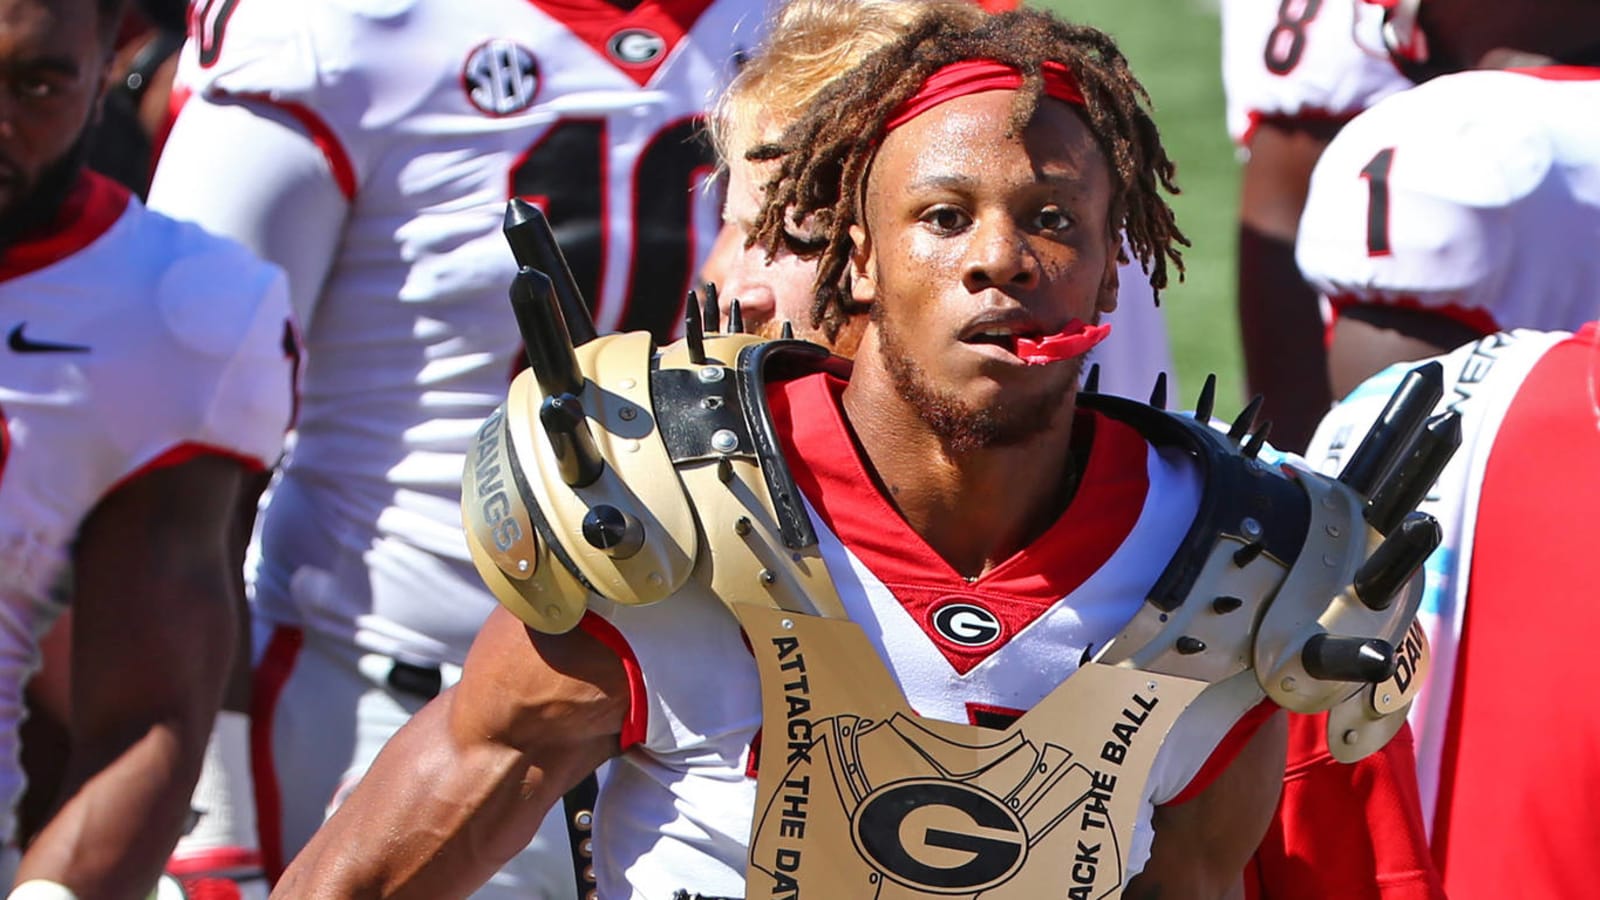 WATCH: Georgia DB Eric Stokes blocks punt with his face, then scores